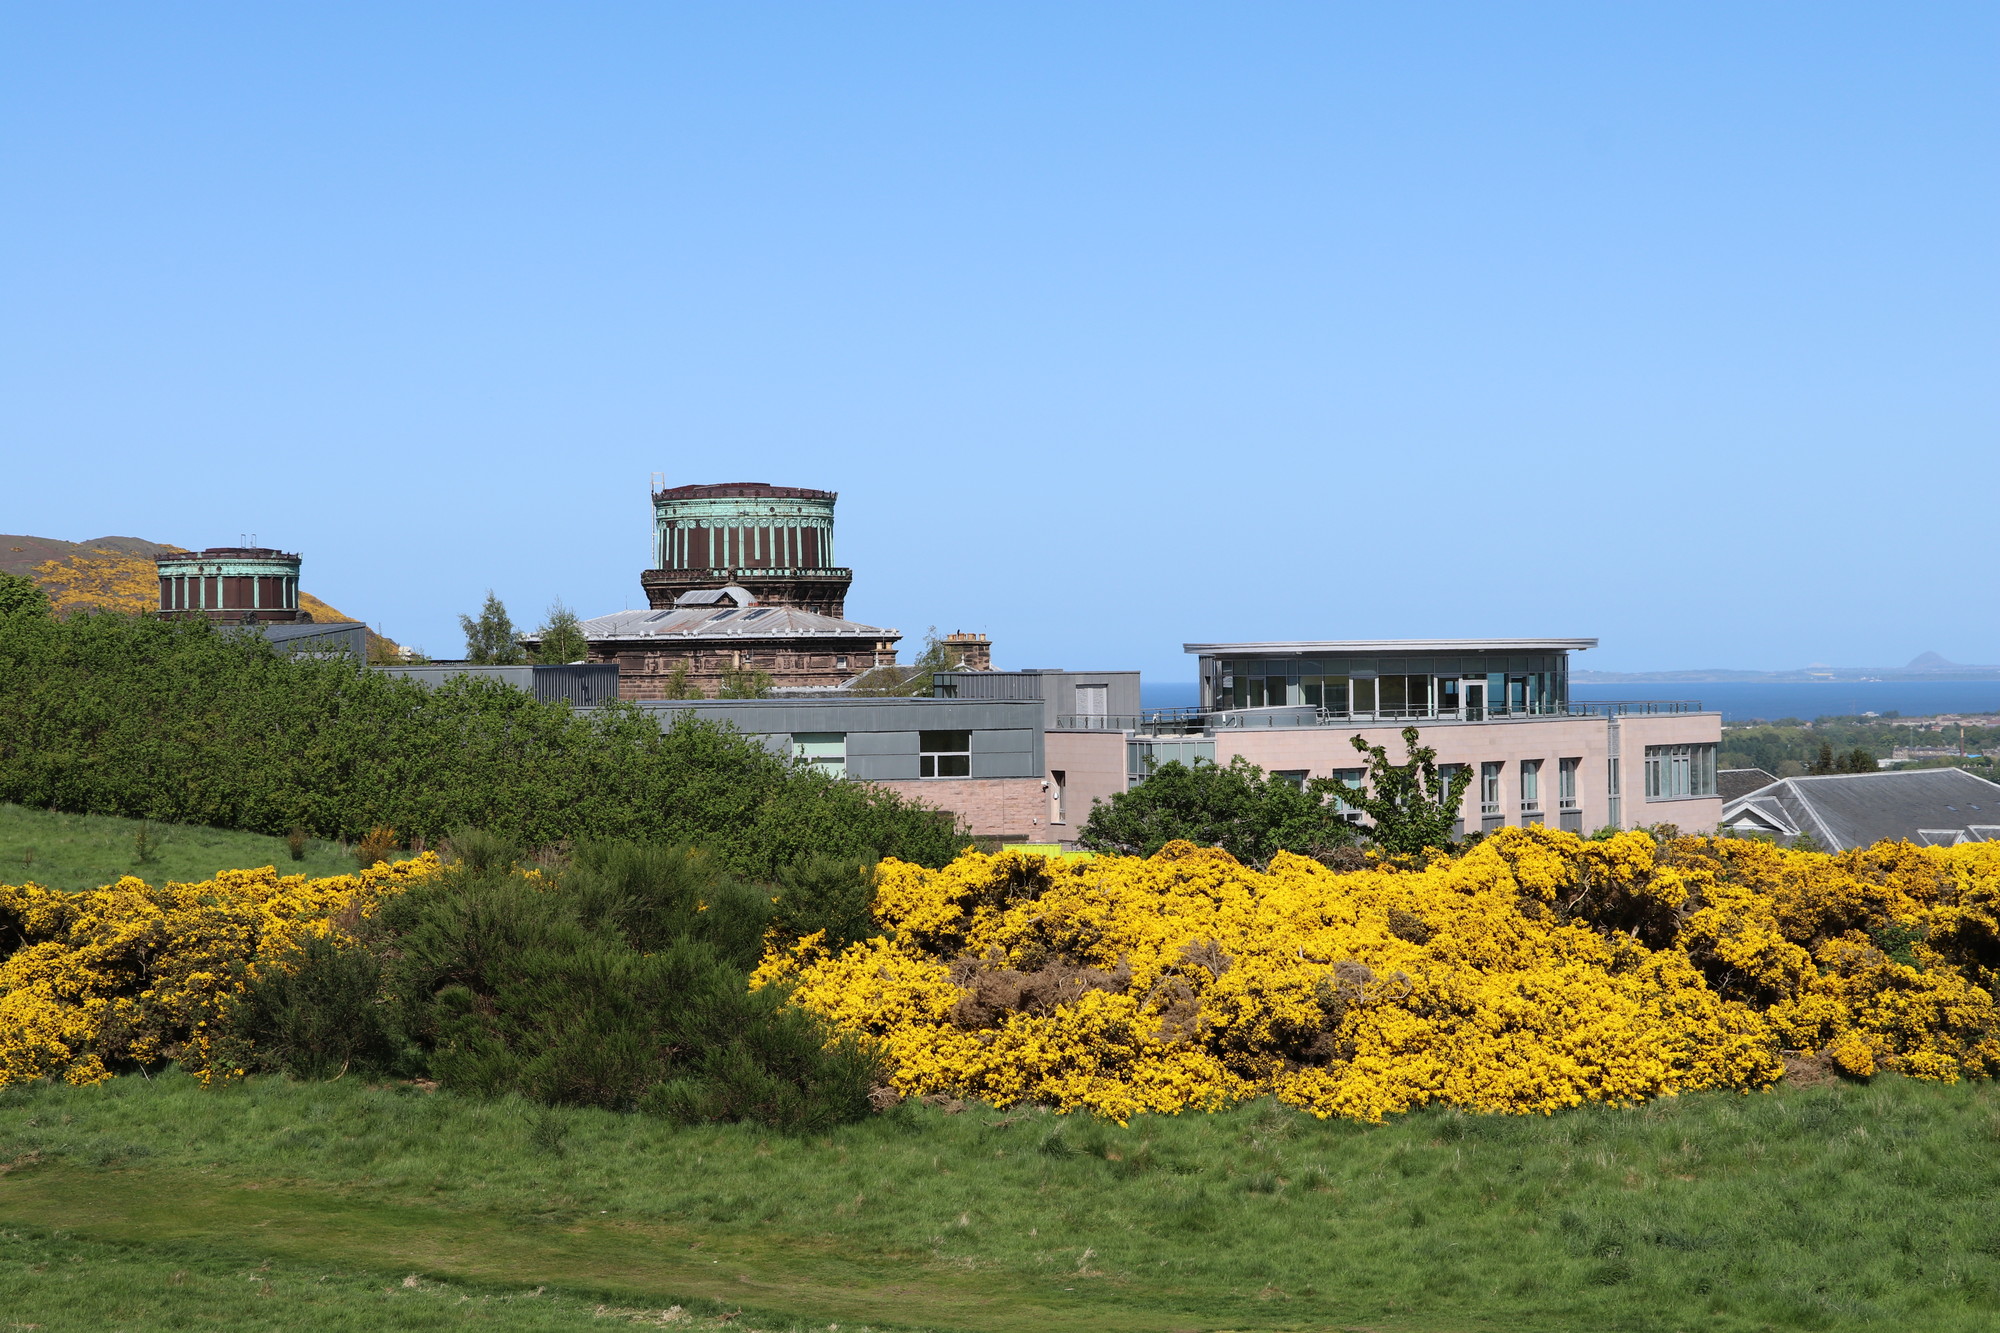 The UK ATC buildings as seen from Blackford Hill.